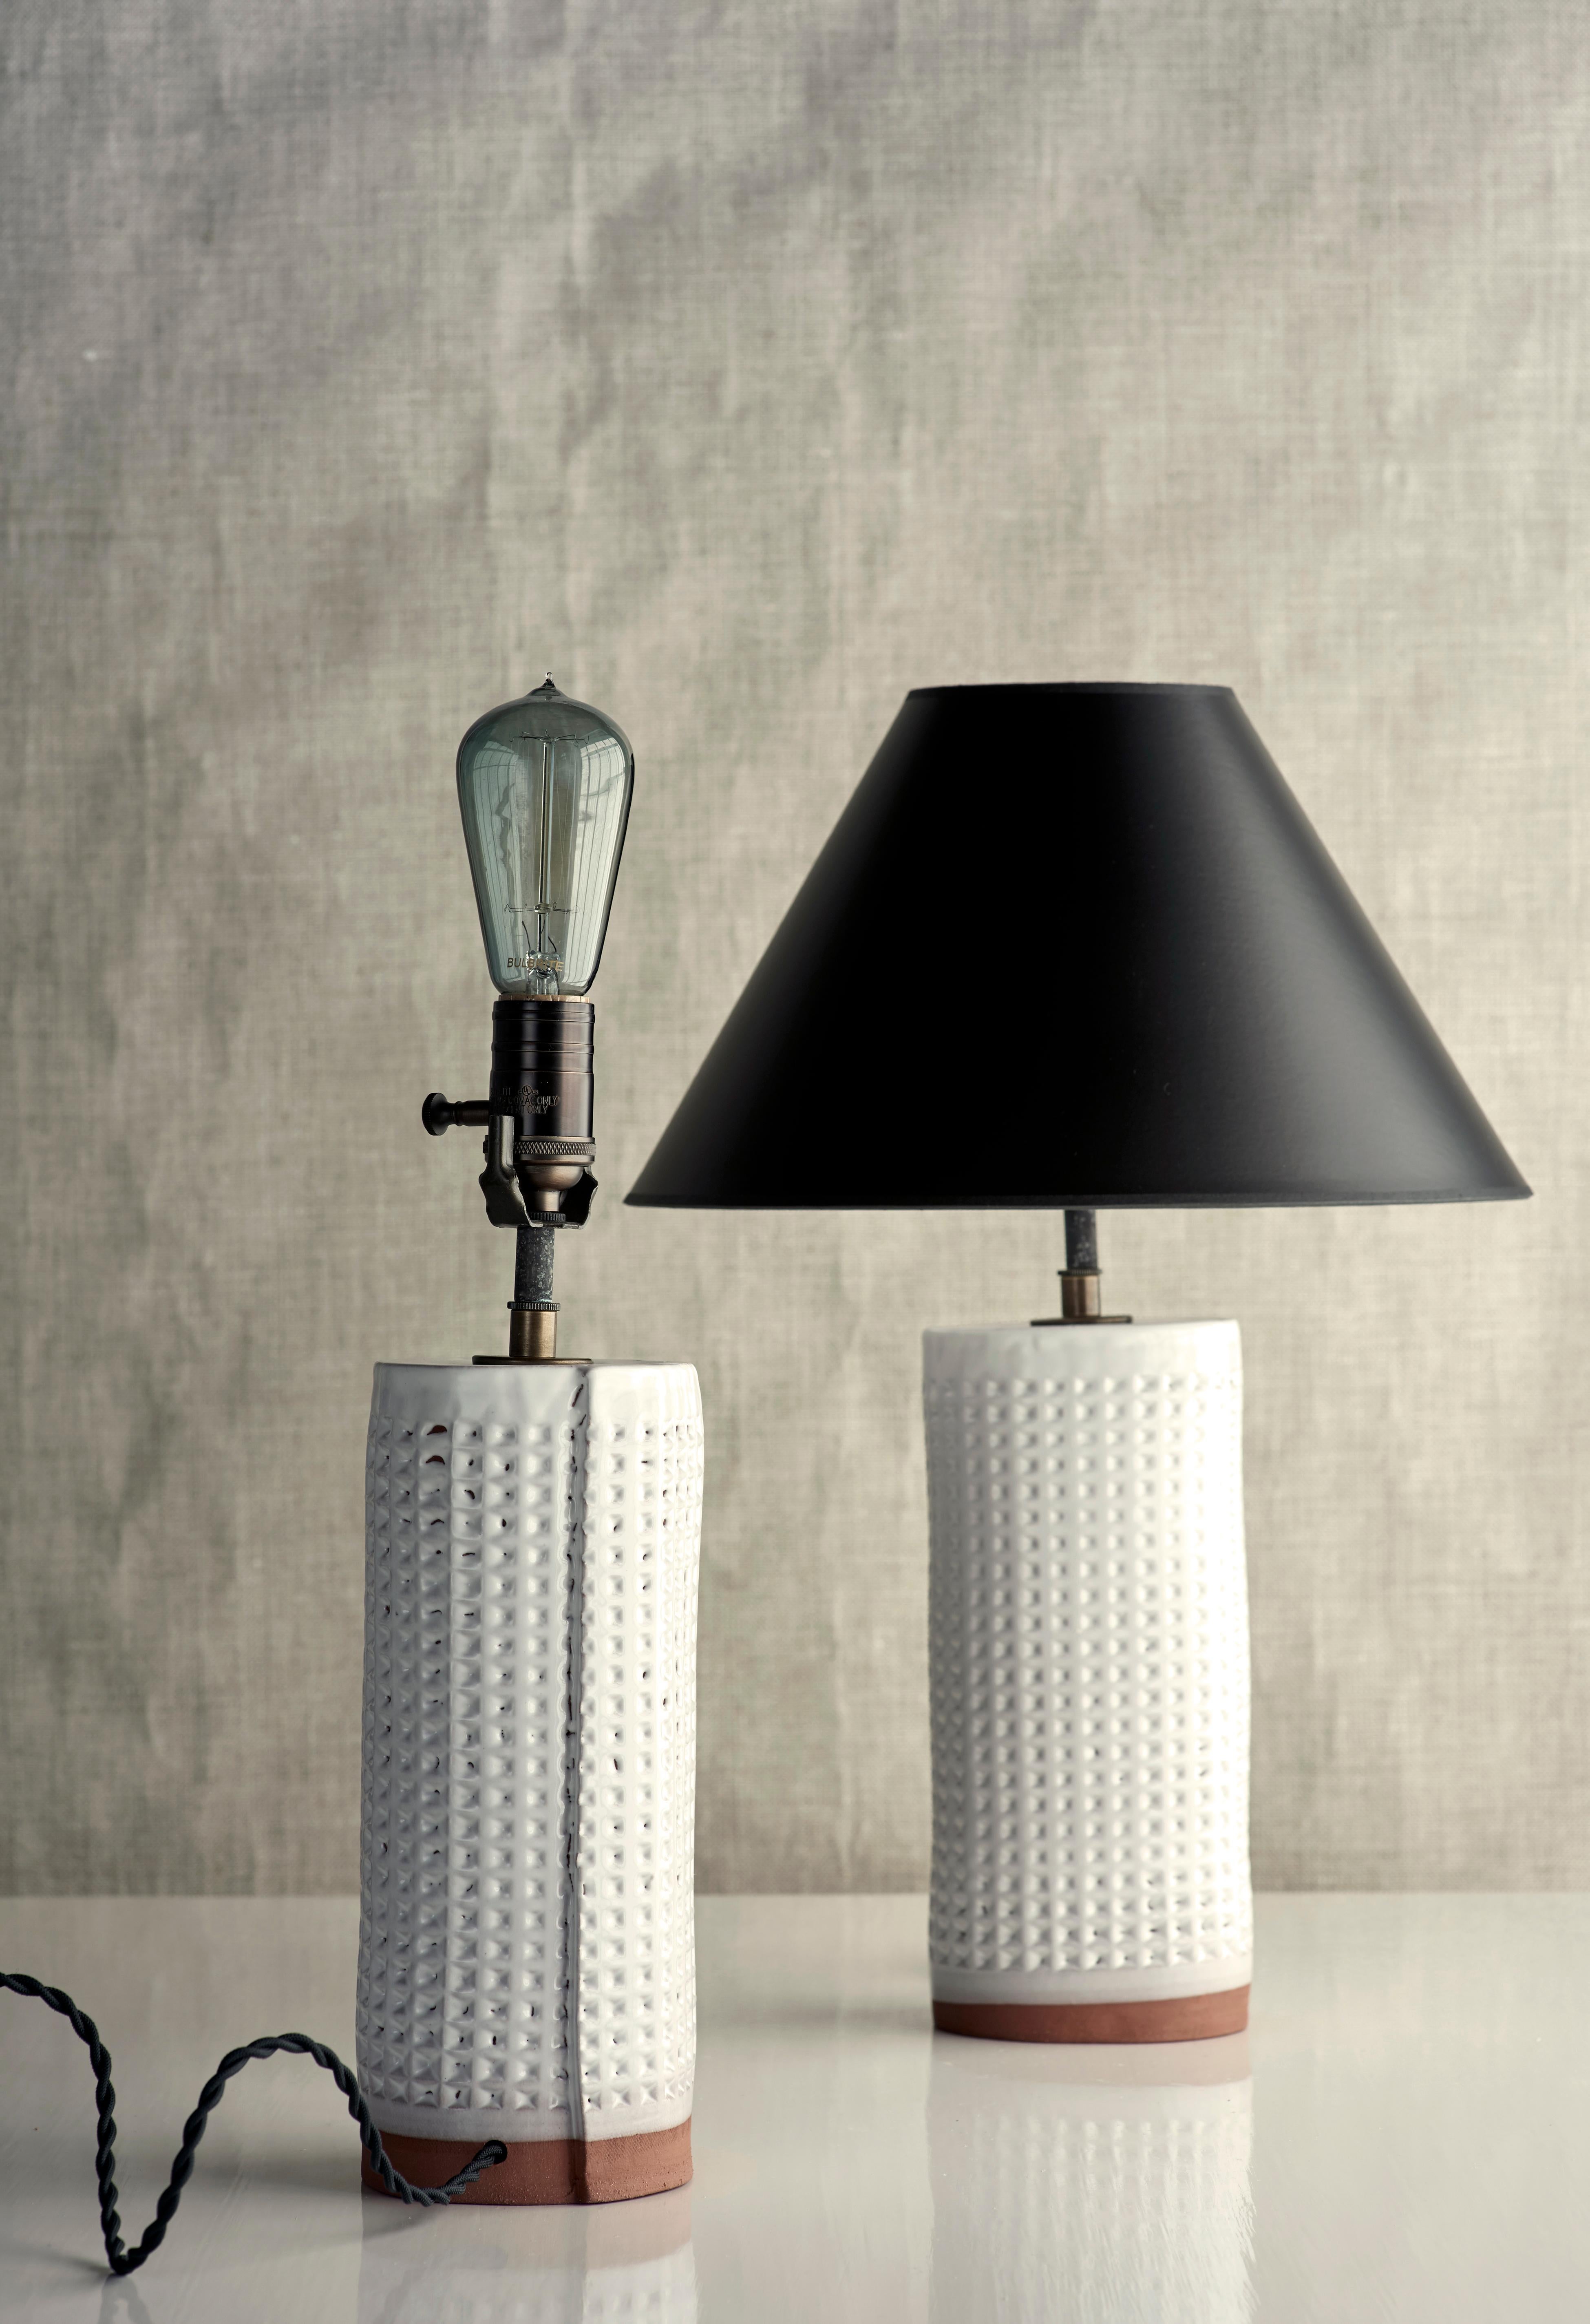 Fired Nammos Lamp, Ceramic Sculptural Table Lamp by Dumais Made